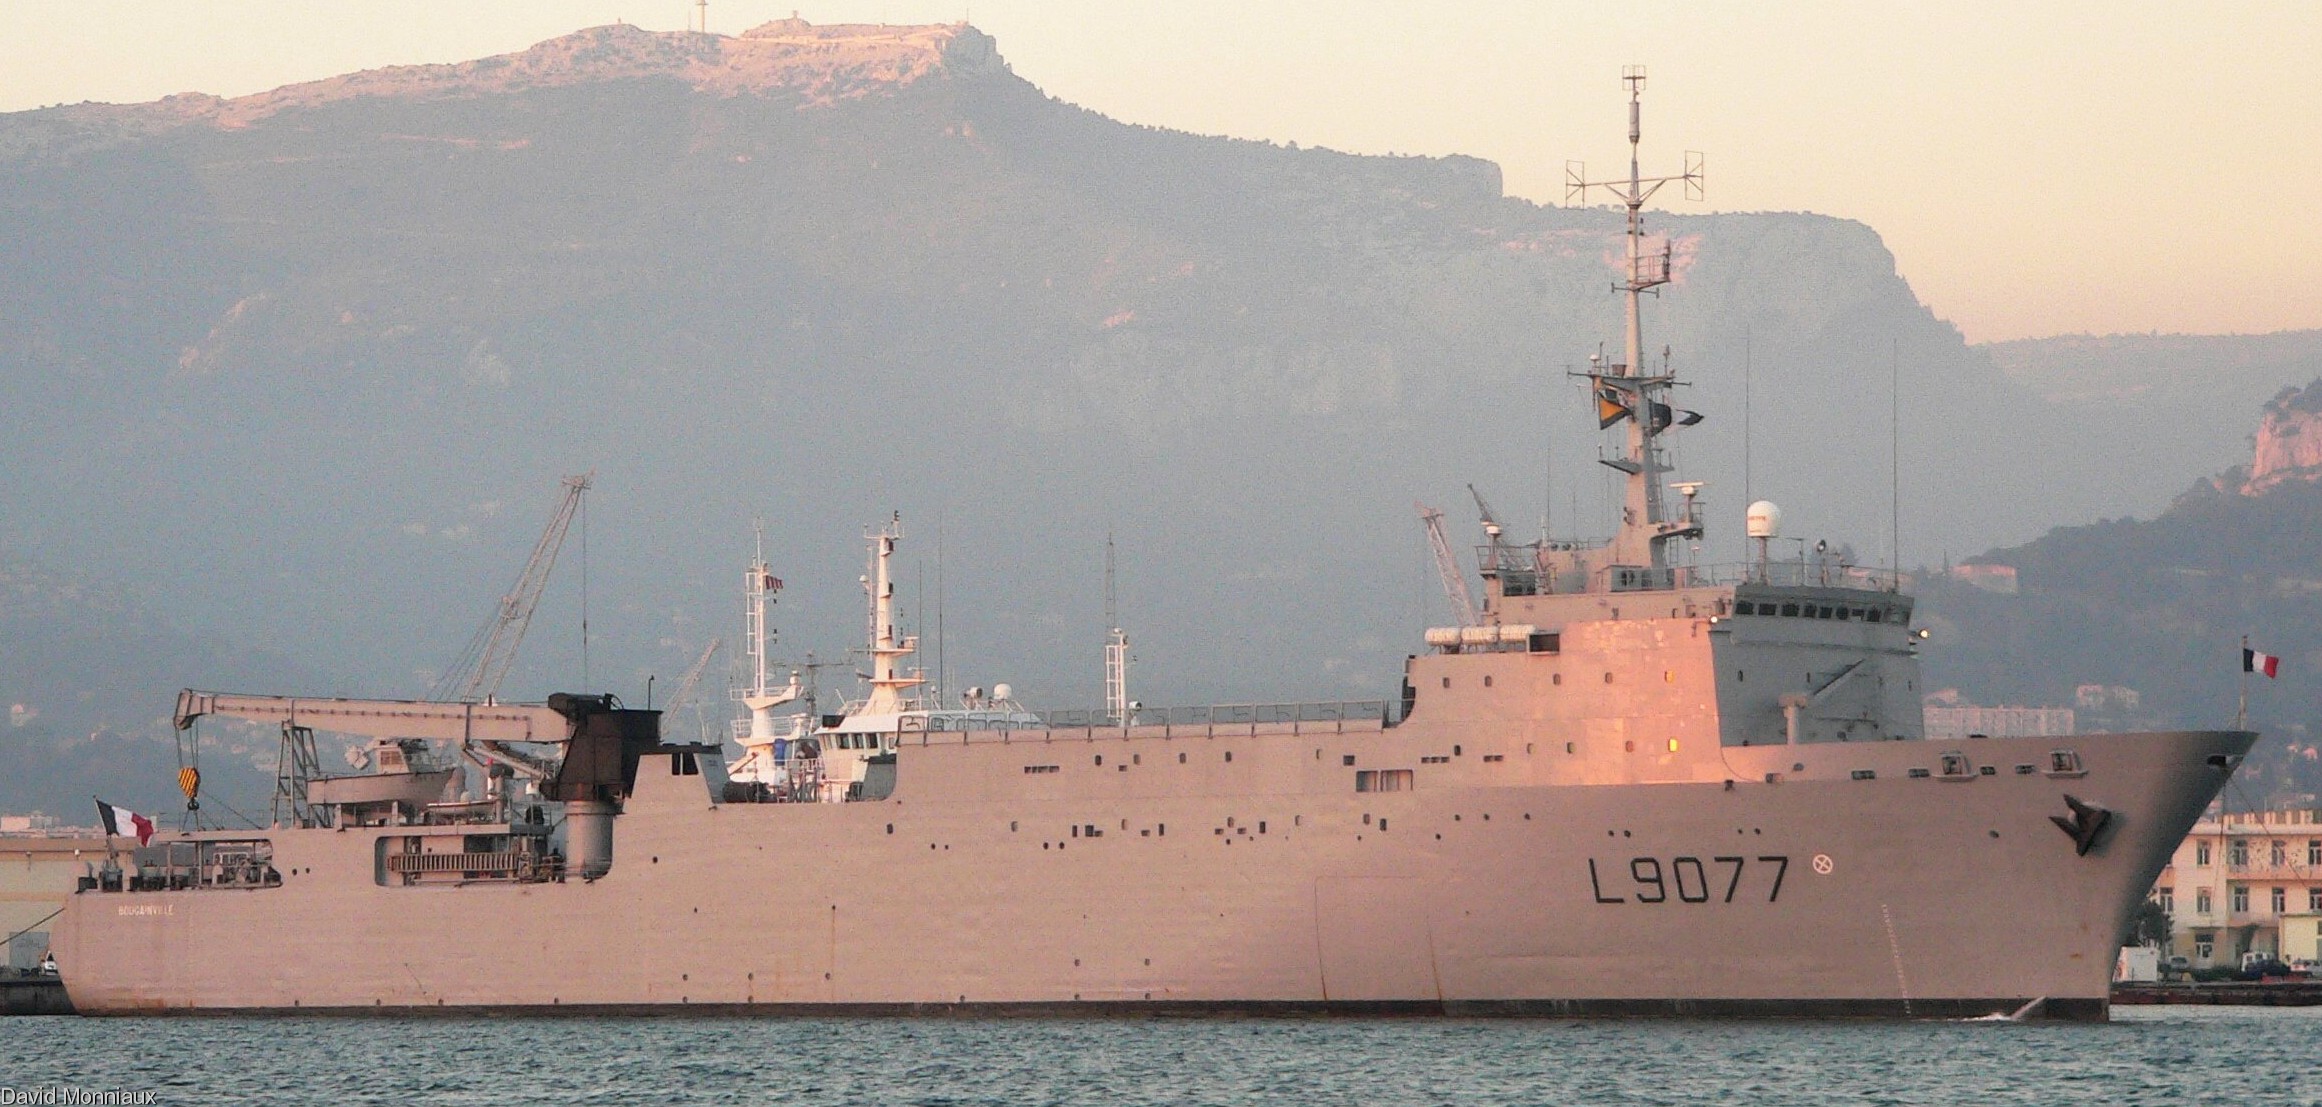 l-9077 fs bougainville amphibious transport dock landing support ship lpd bts french navy marine nationale 02x